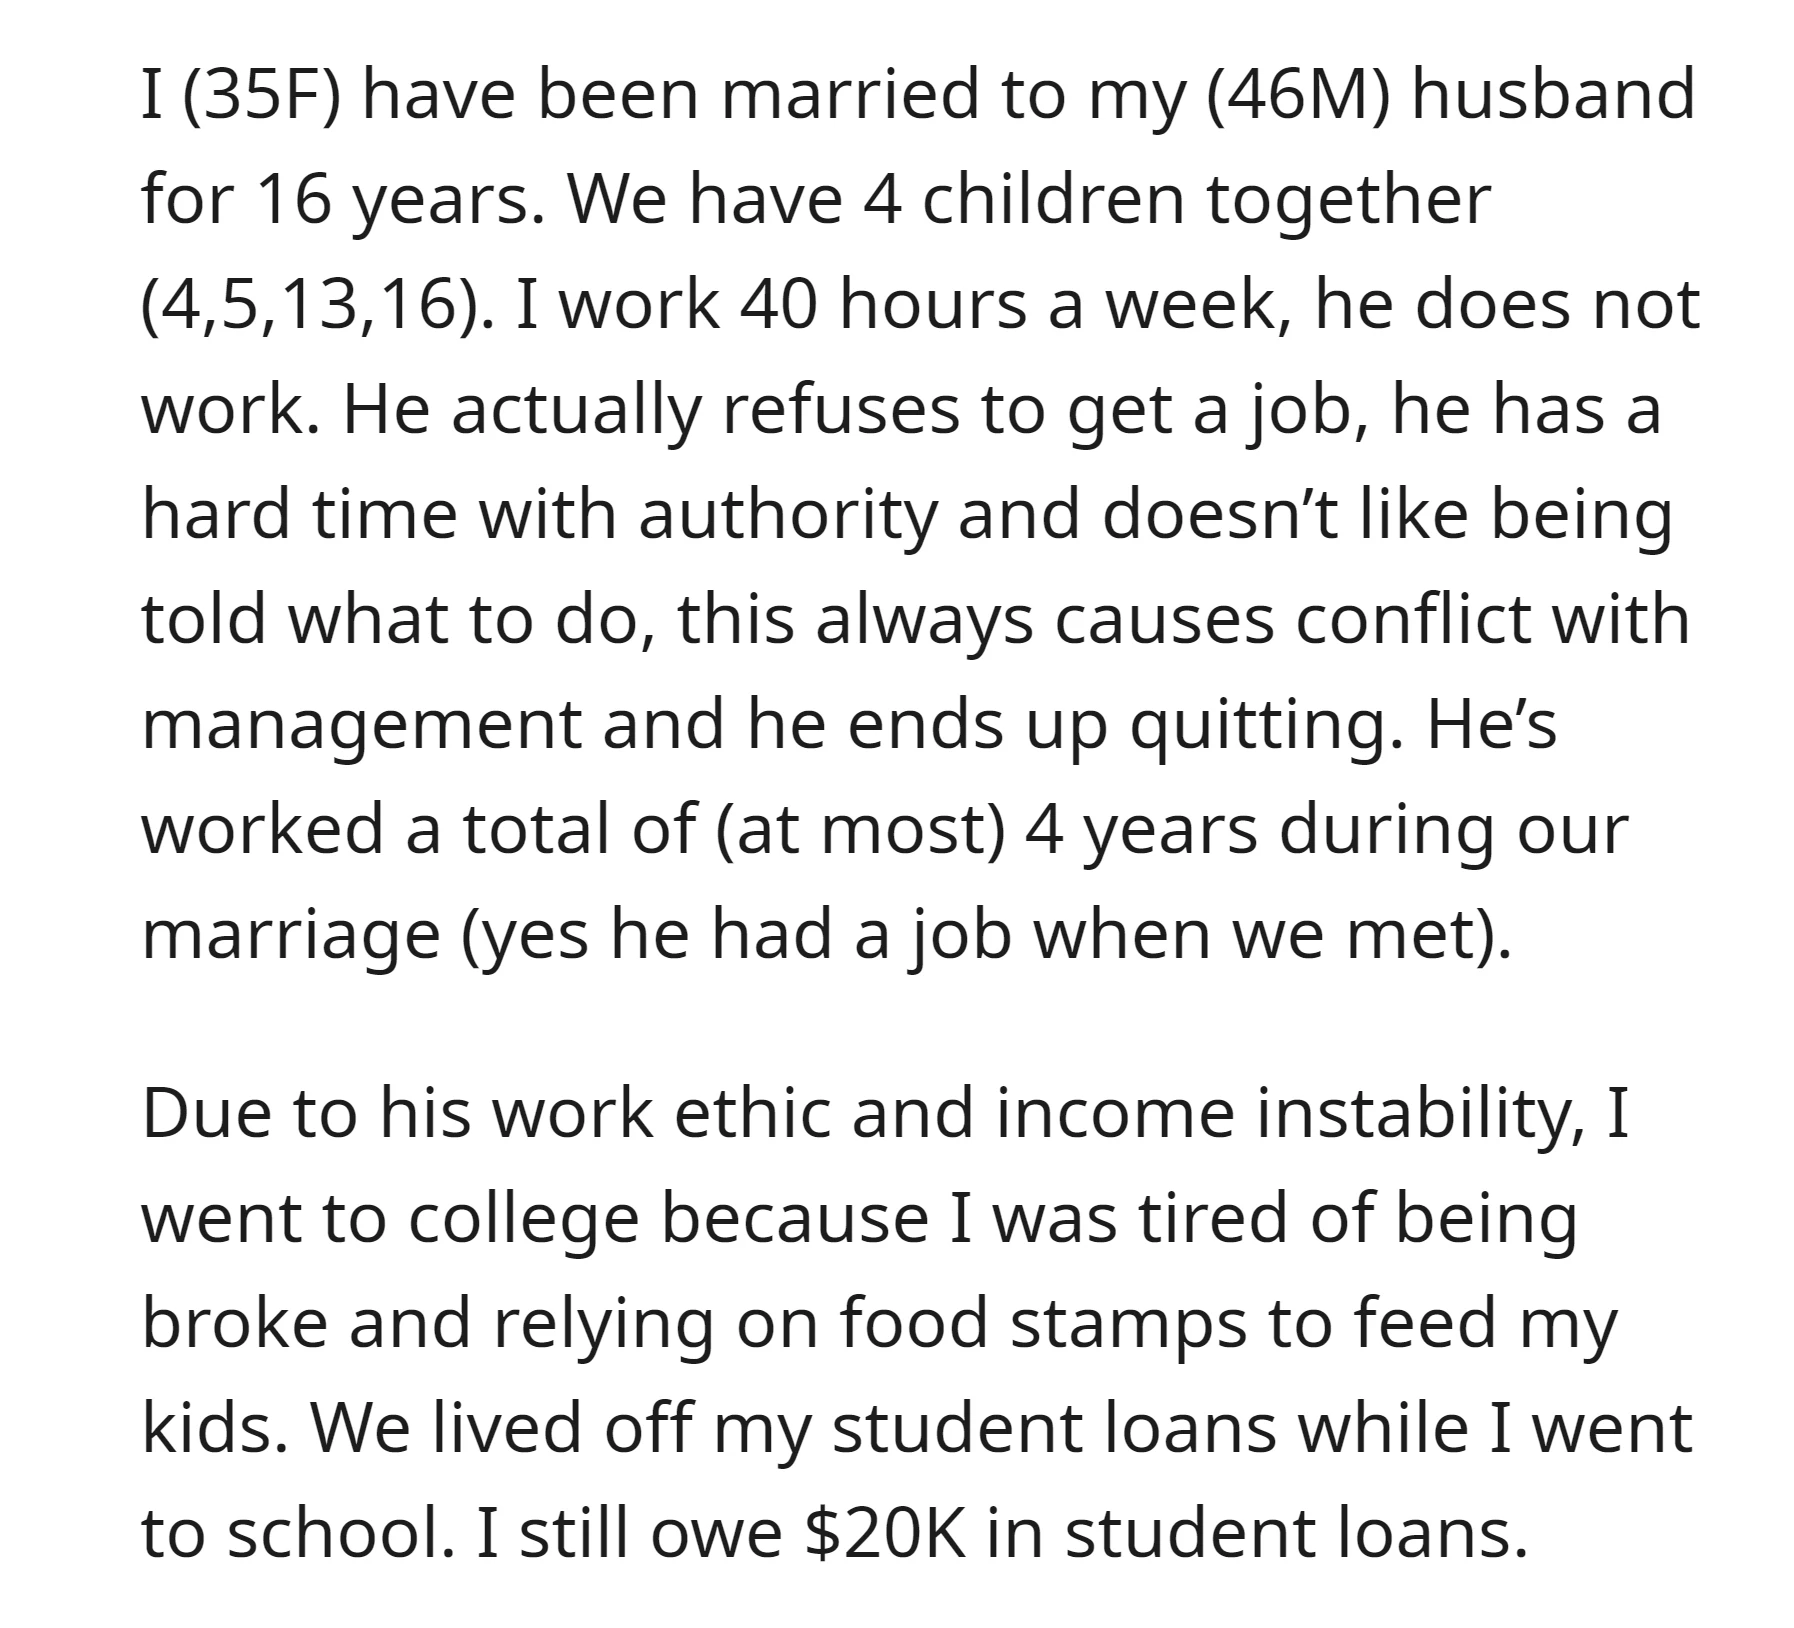 OP's husband refuses to work, so OP went to college to escape financial instability